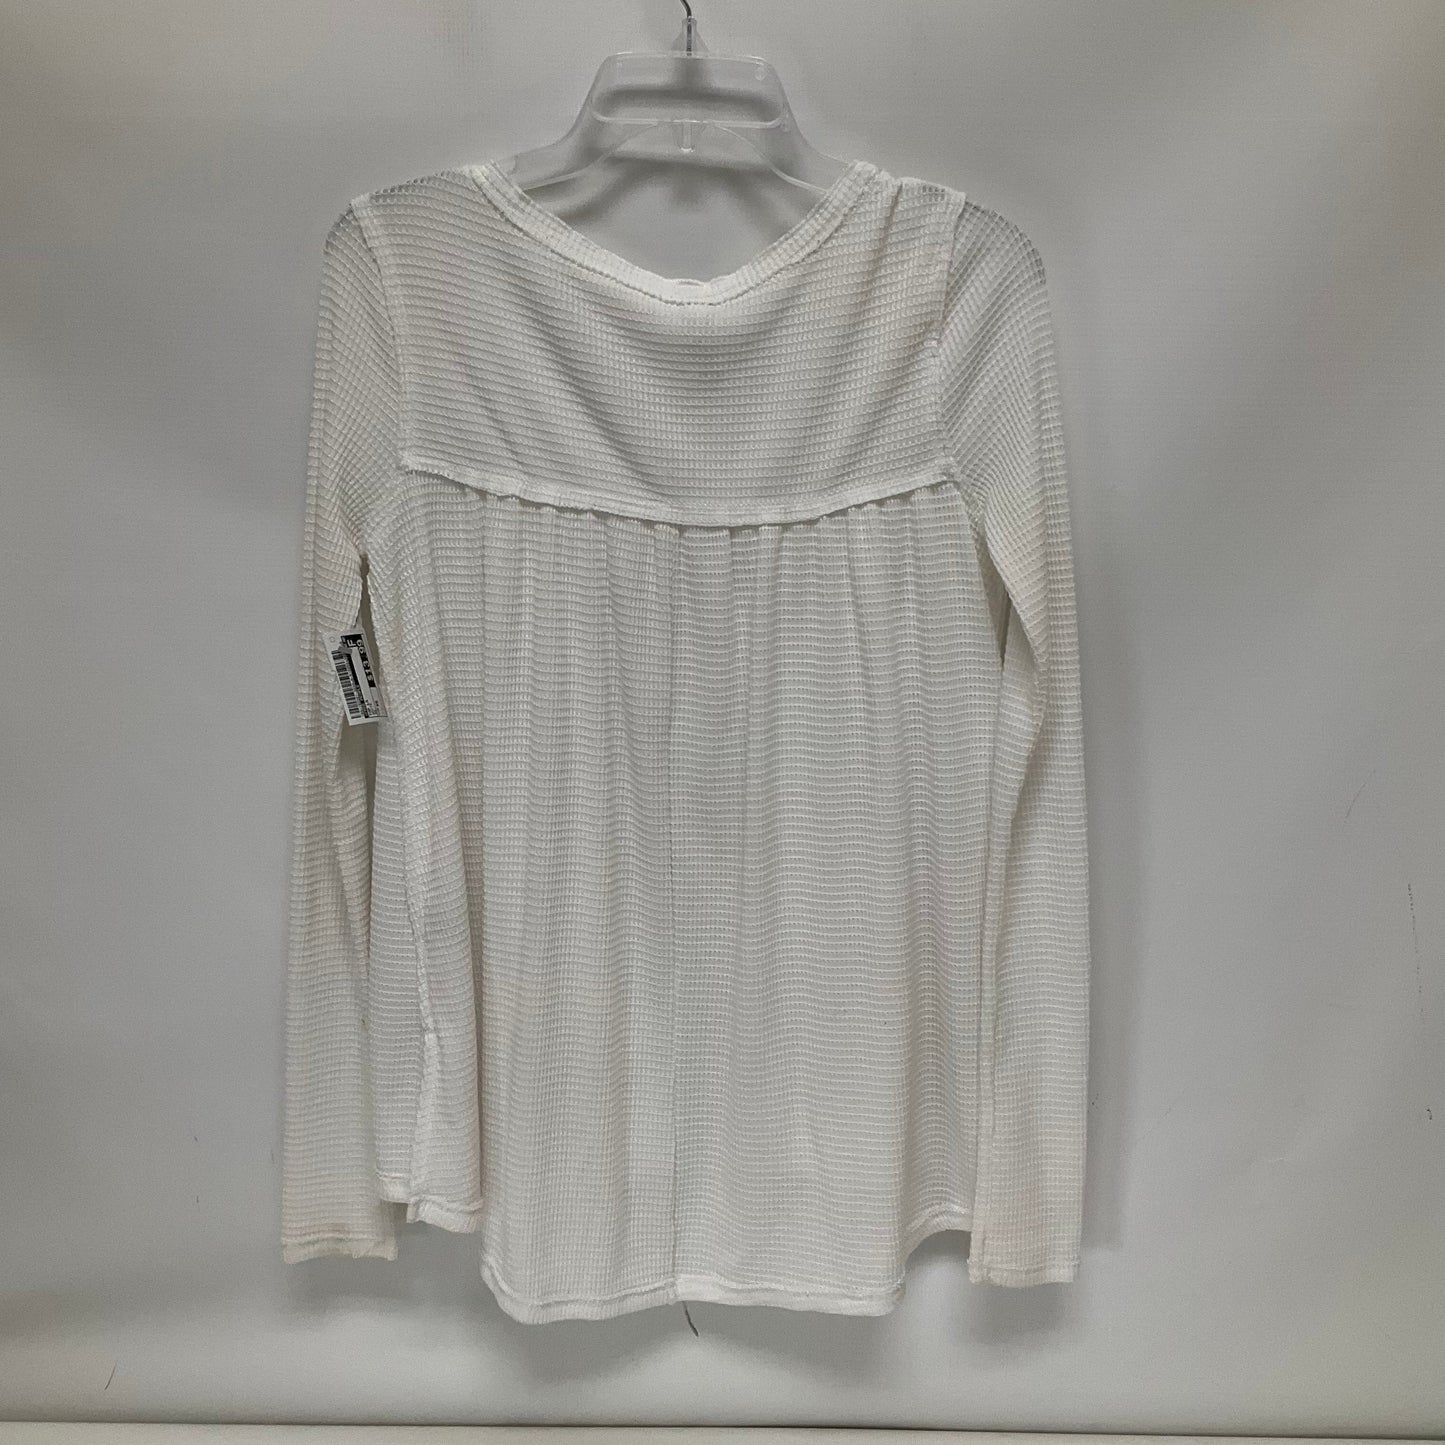 White Top Long Sleeve Free People, Size Xs